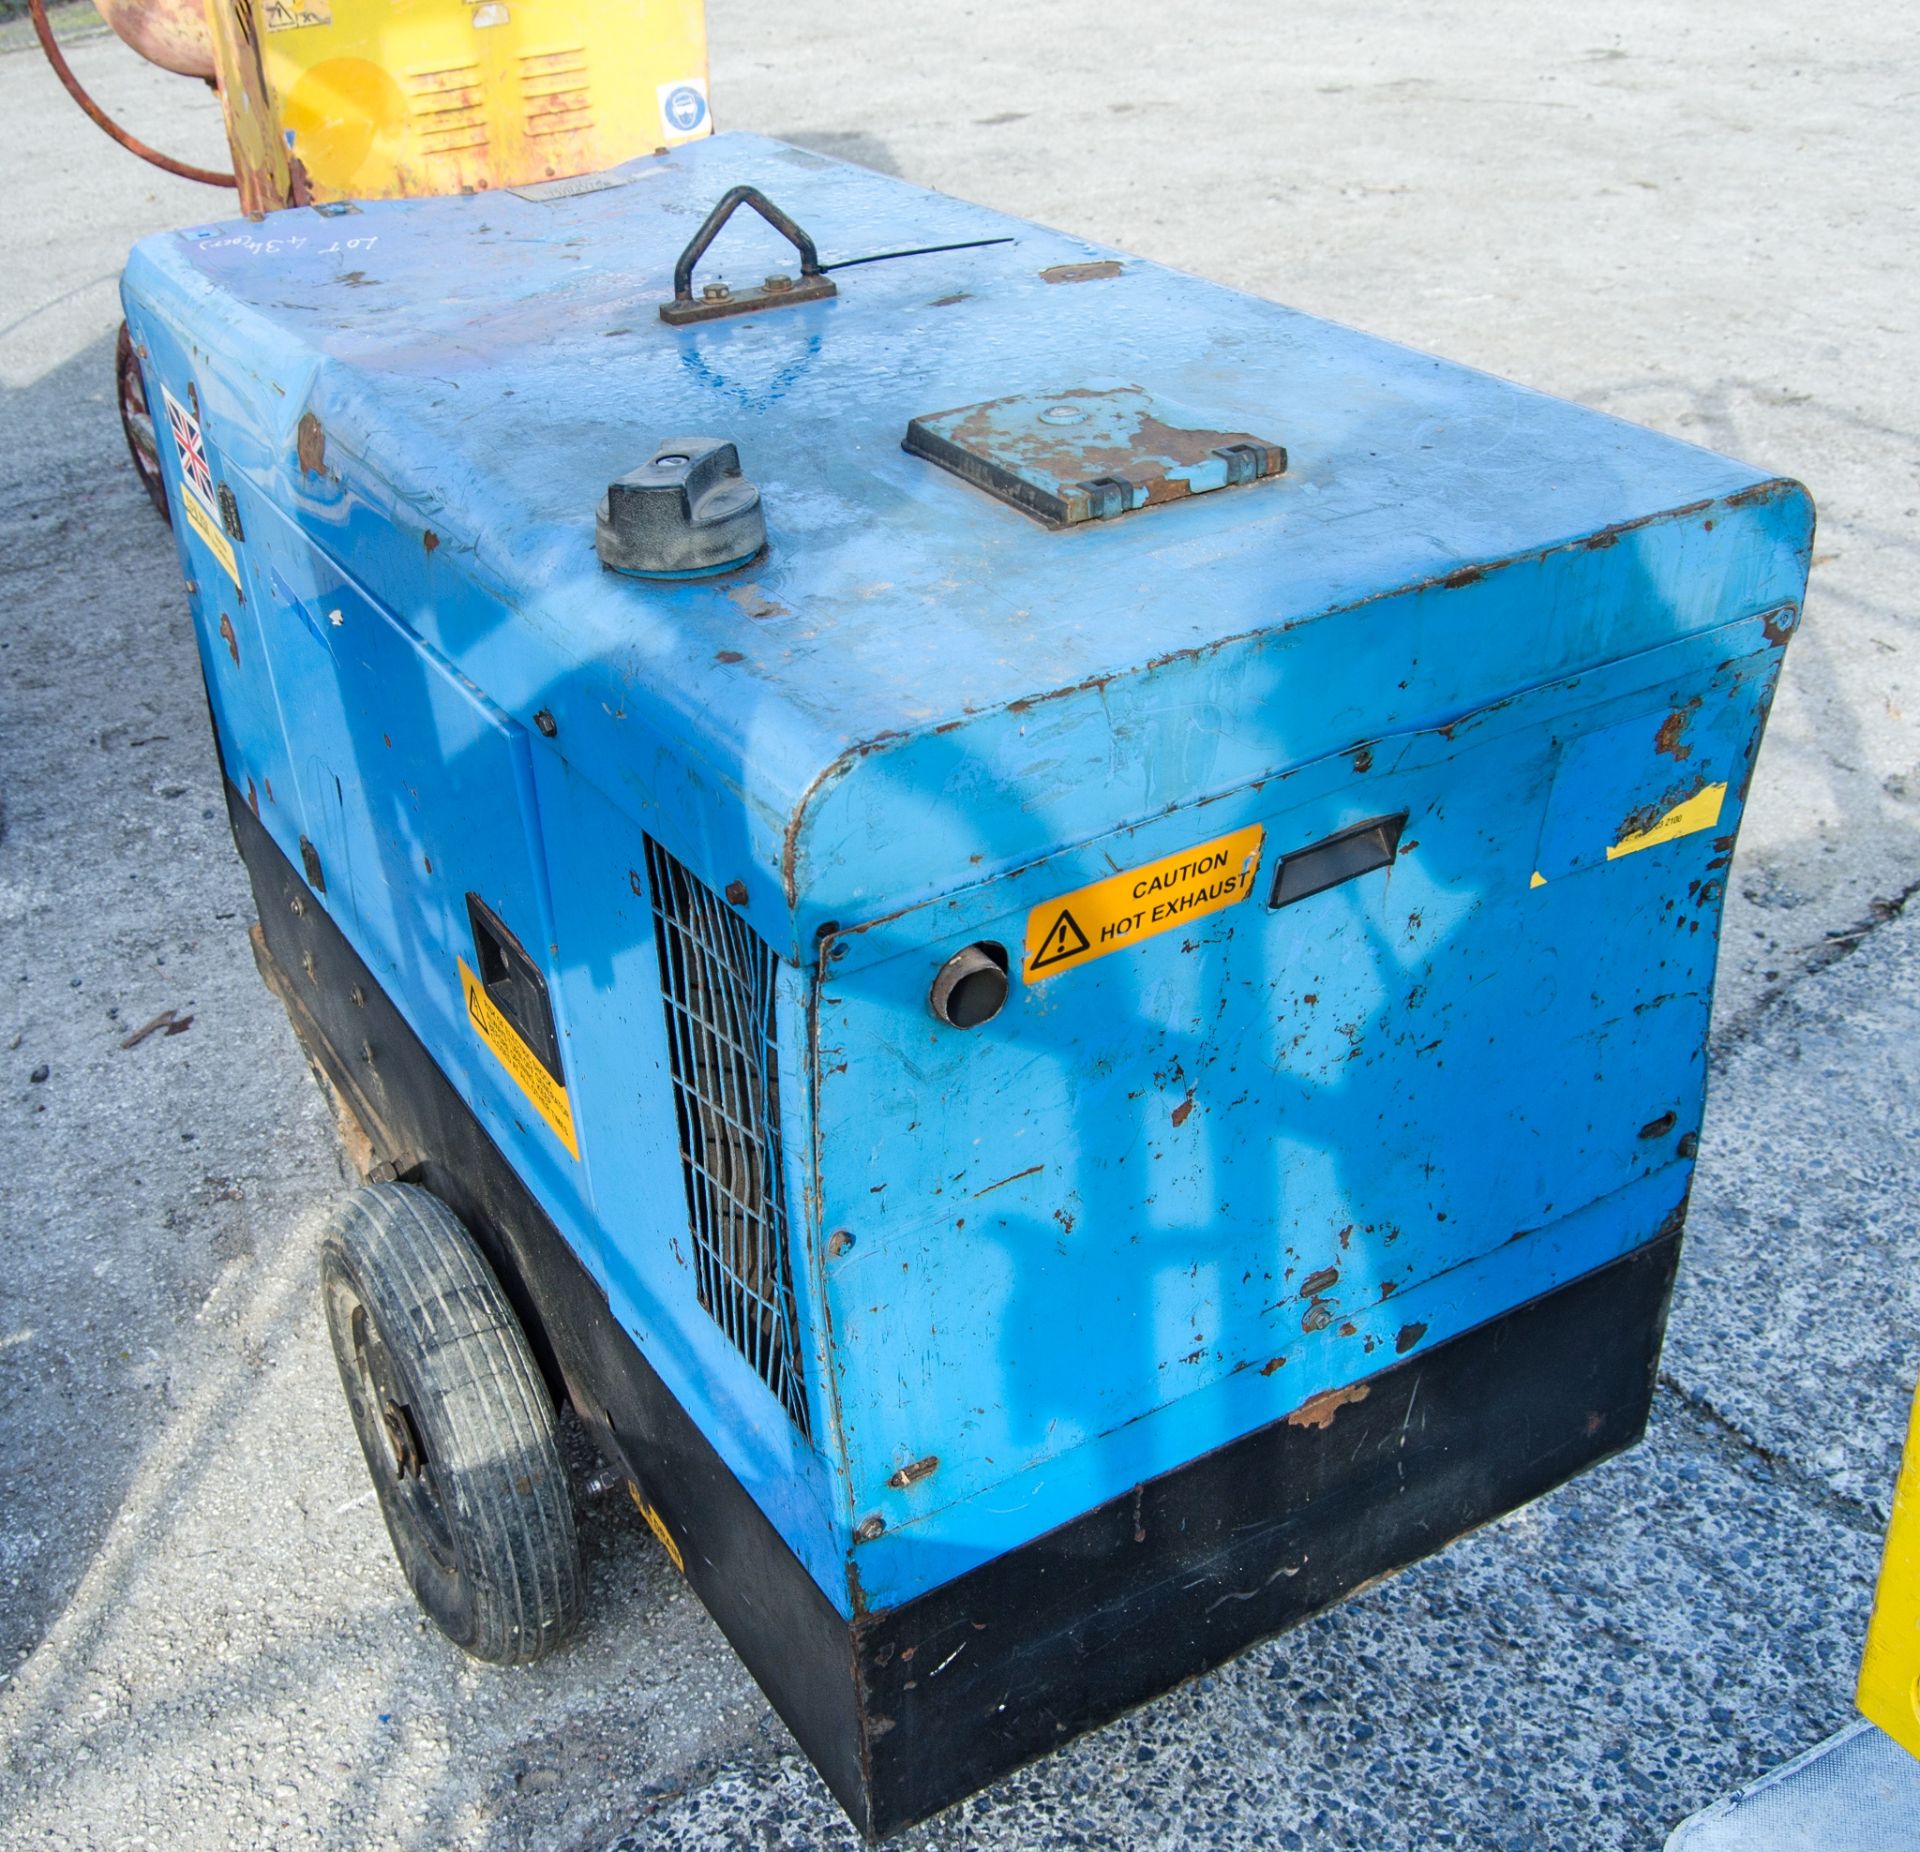 Stephill 10 kva diesel driven generator S/N: 400734 Recorded hours: 5924 GEN834 - Image 2 of 5